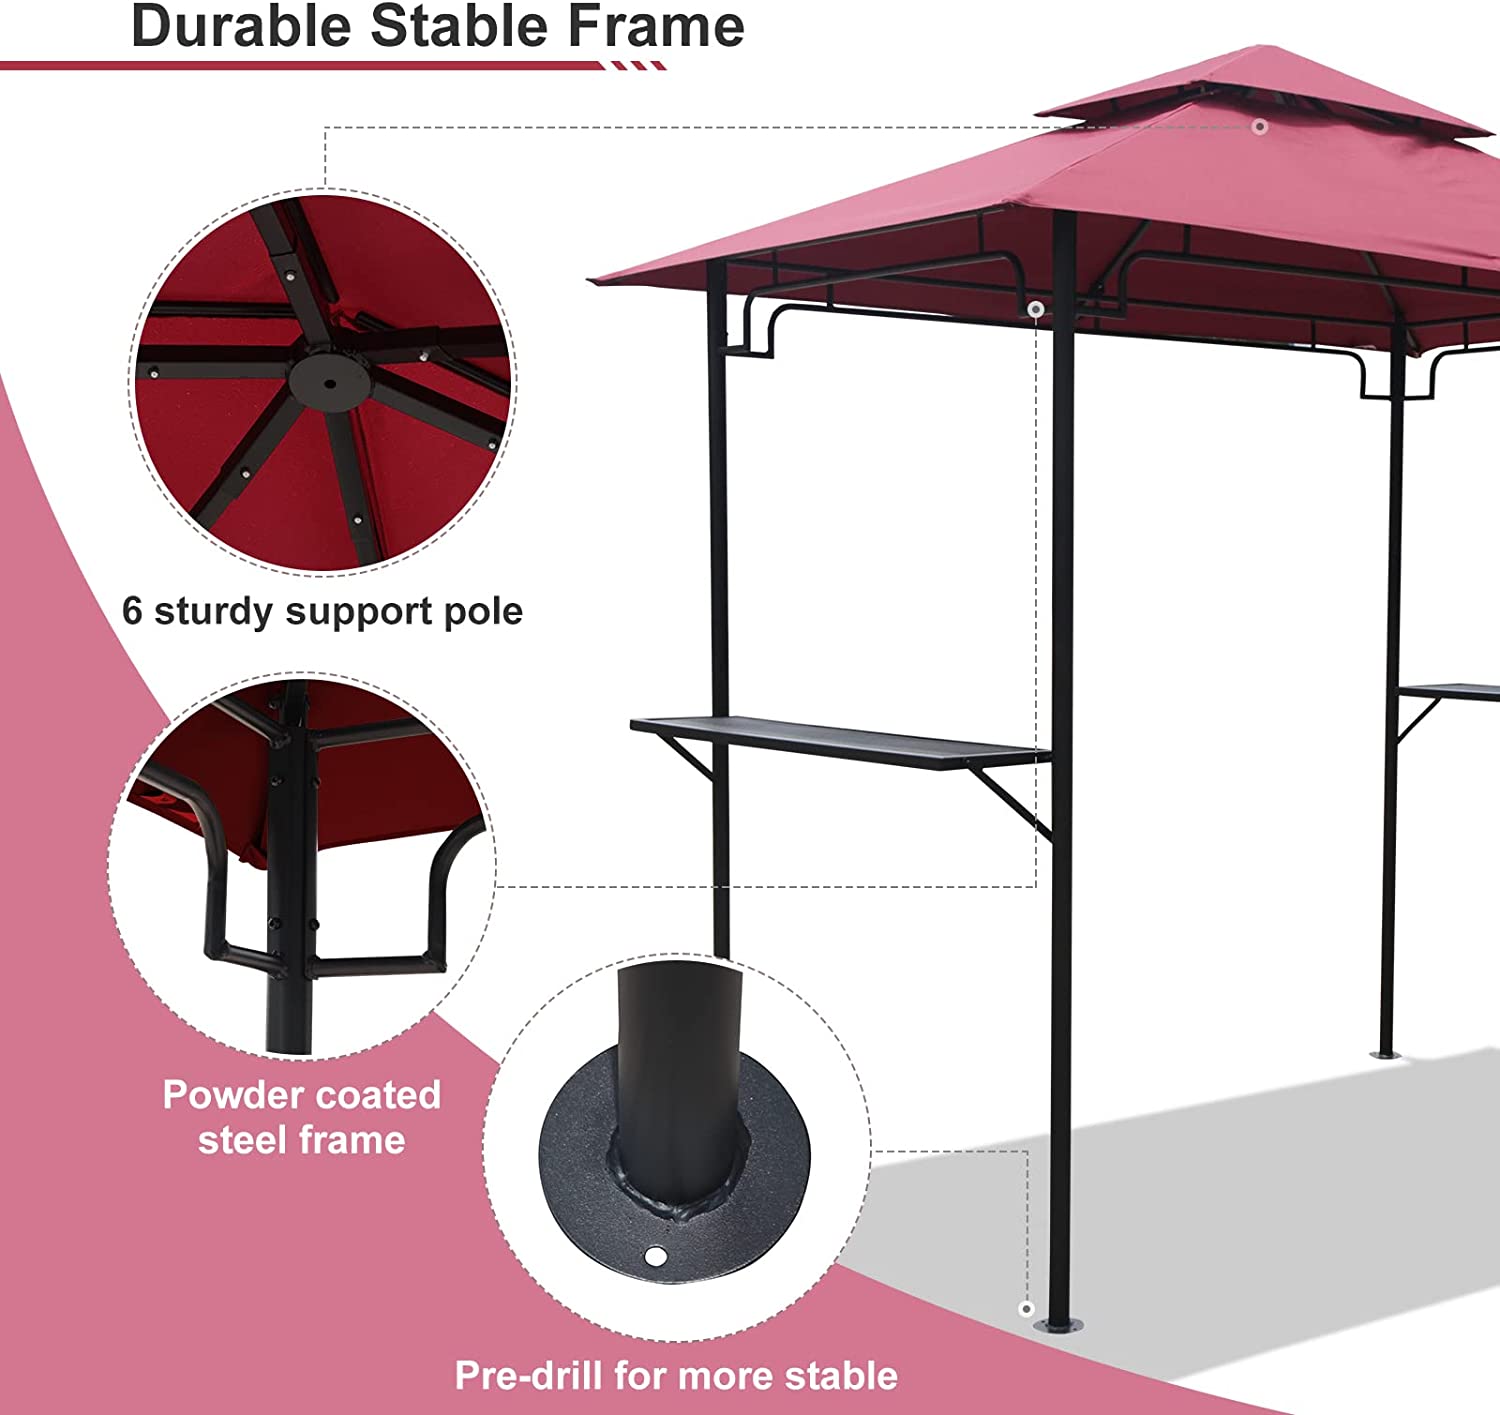 Grill Gazebo 8 x 5 Double Tiered Outdoor BBQ Grill Patio Canopy, Backyard Barbeque Tent with Extra Shelves, Red